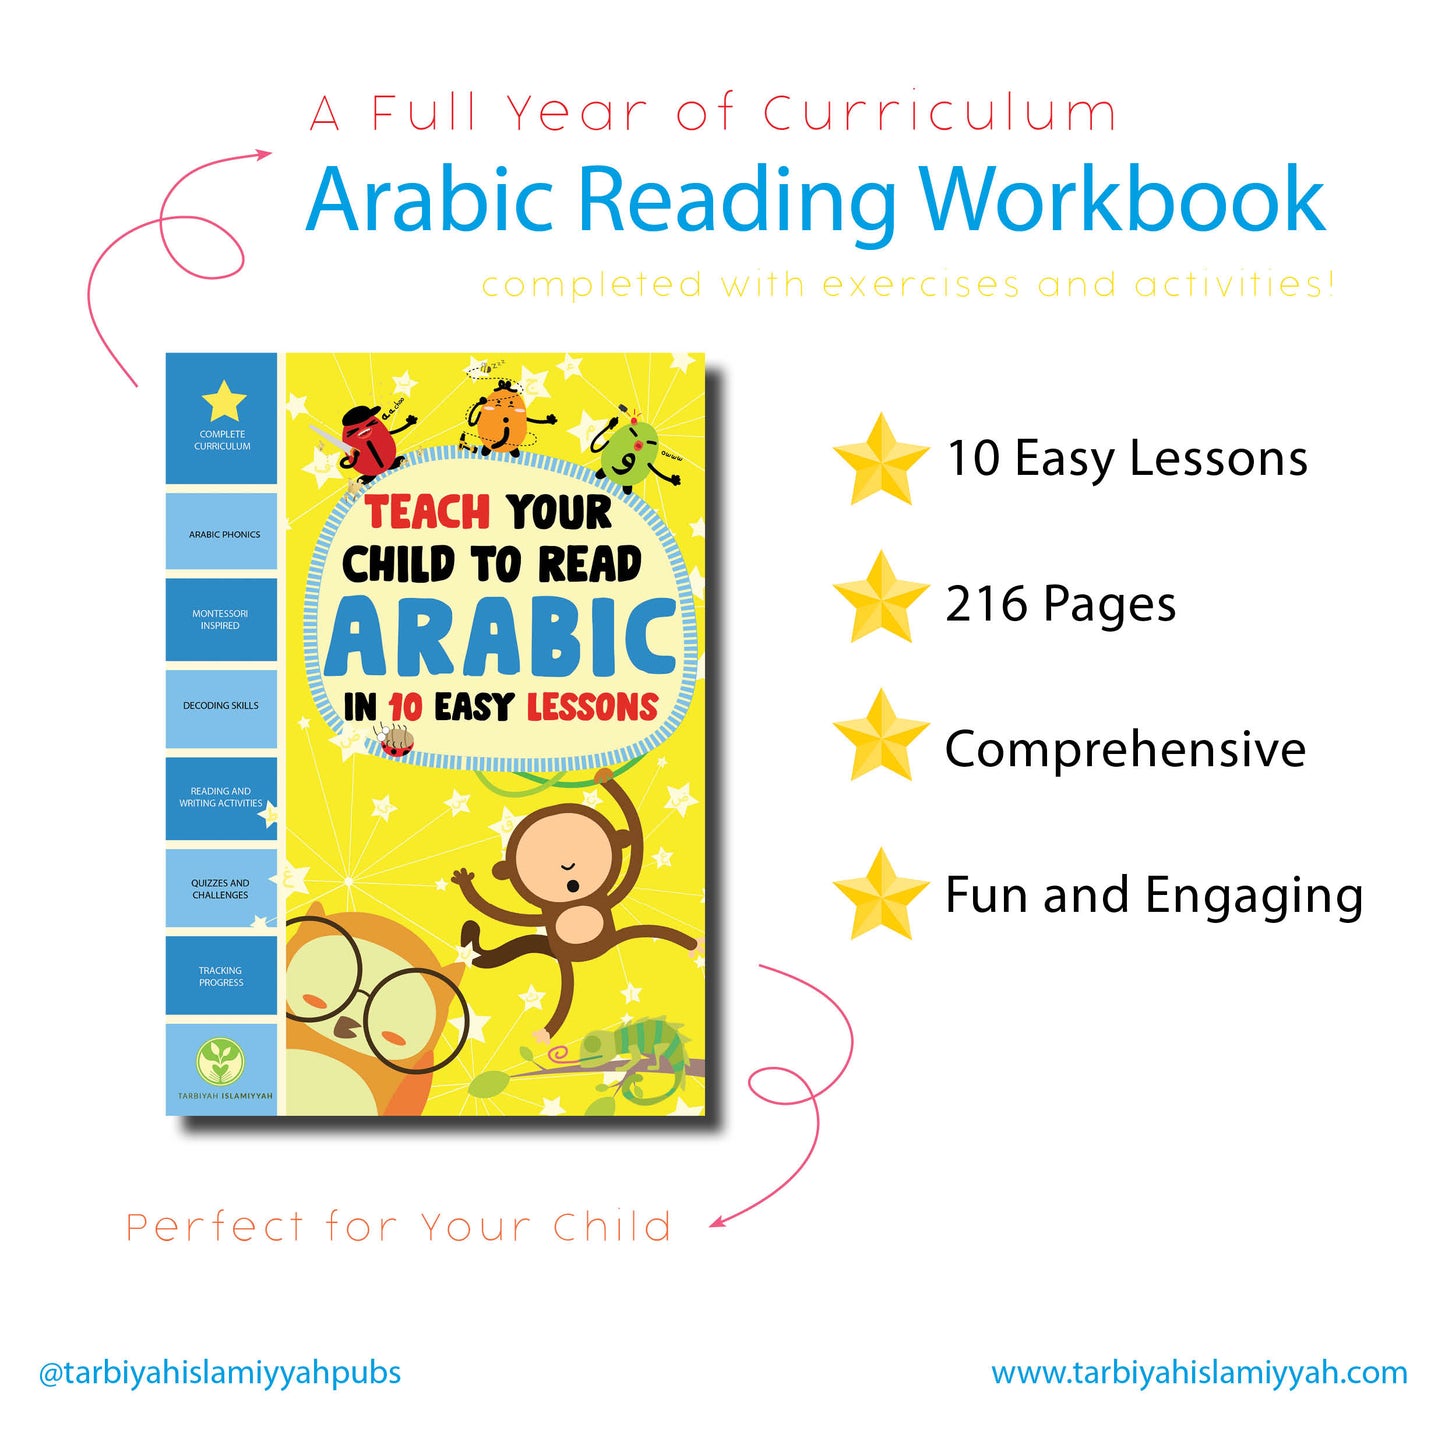 Teach Your Child To Read Arabic in 10 Easy Lessons